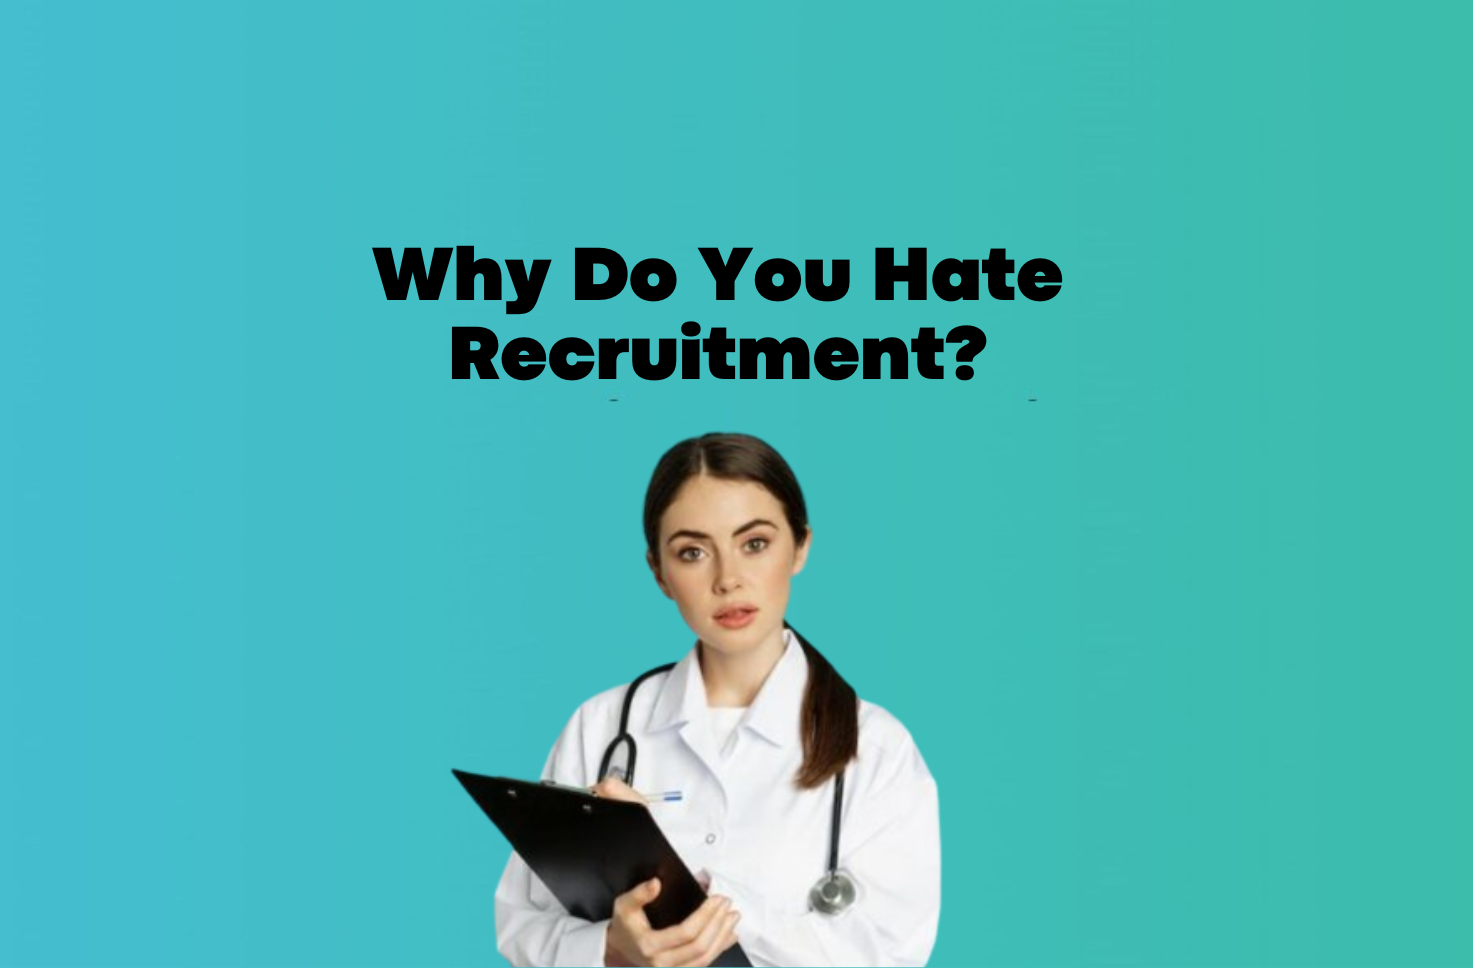 Why Do You Hate Recruitment?